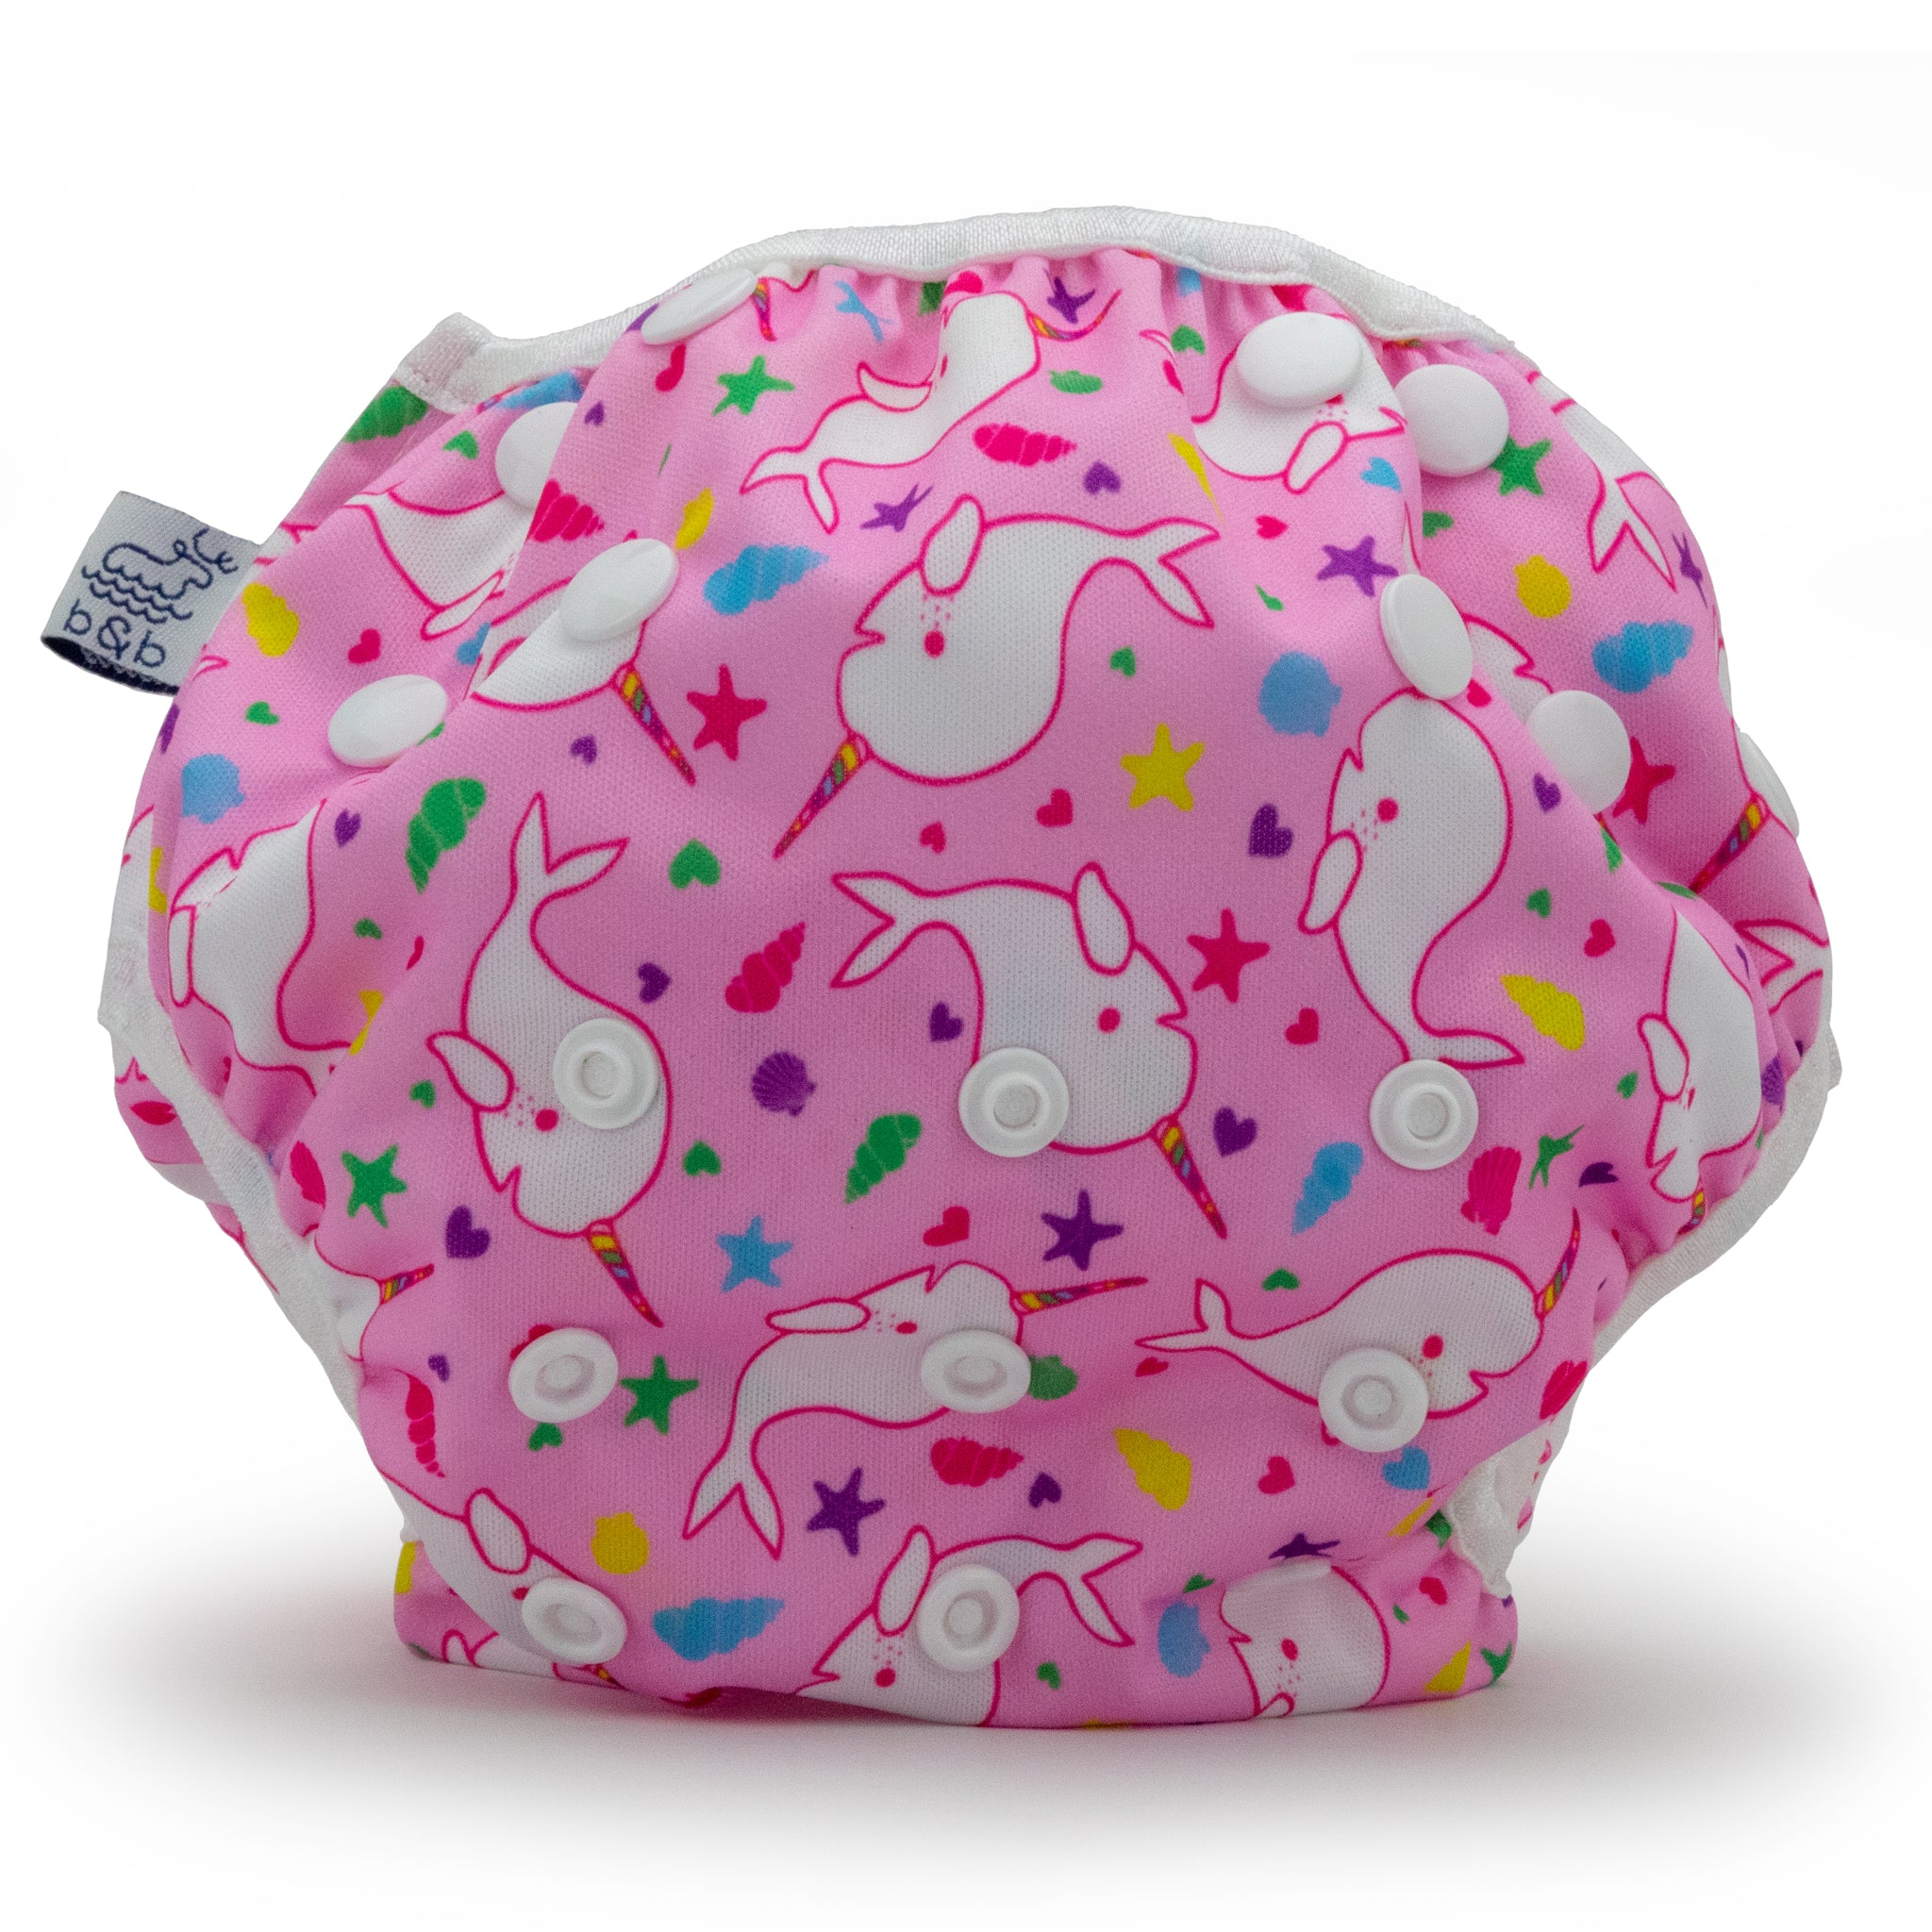 Beau Belle Littles reusable swim diaper for babies, pink background and narwhals design, front view.